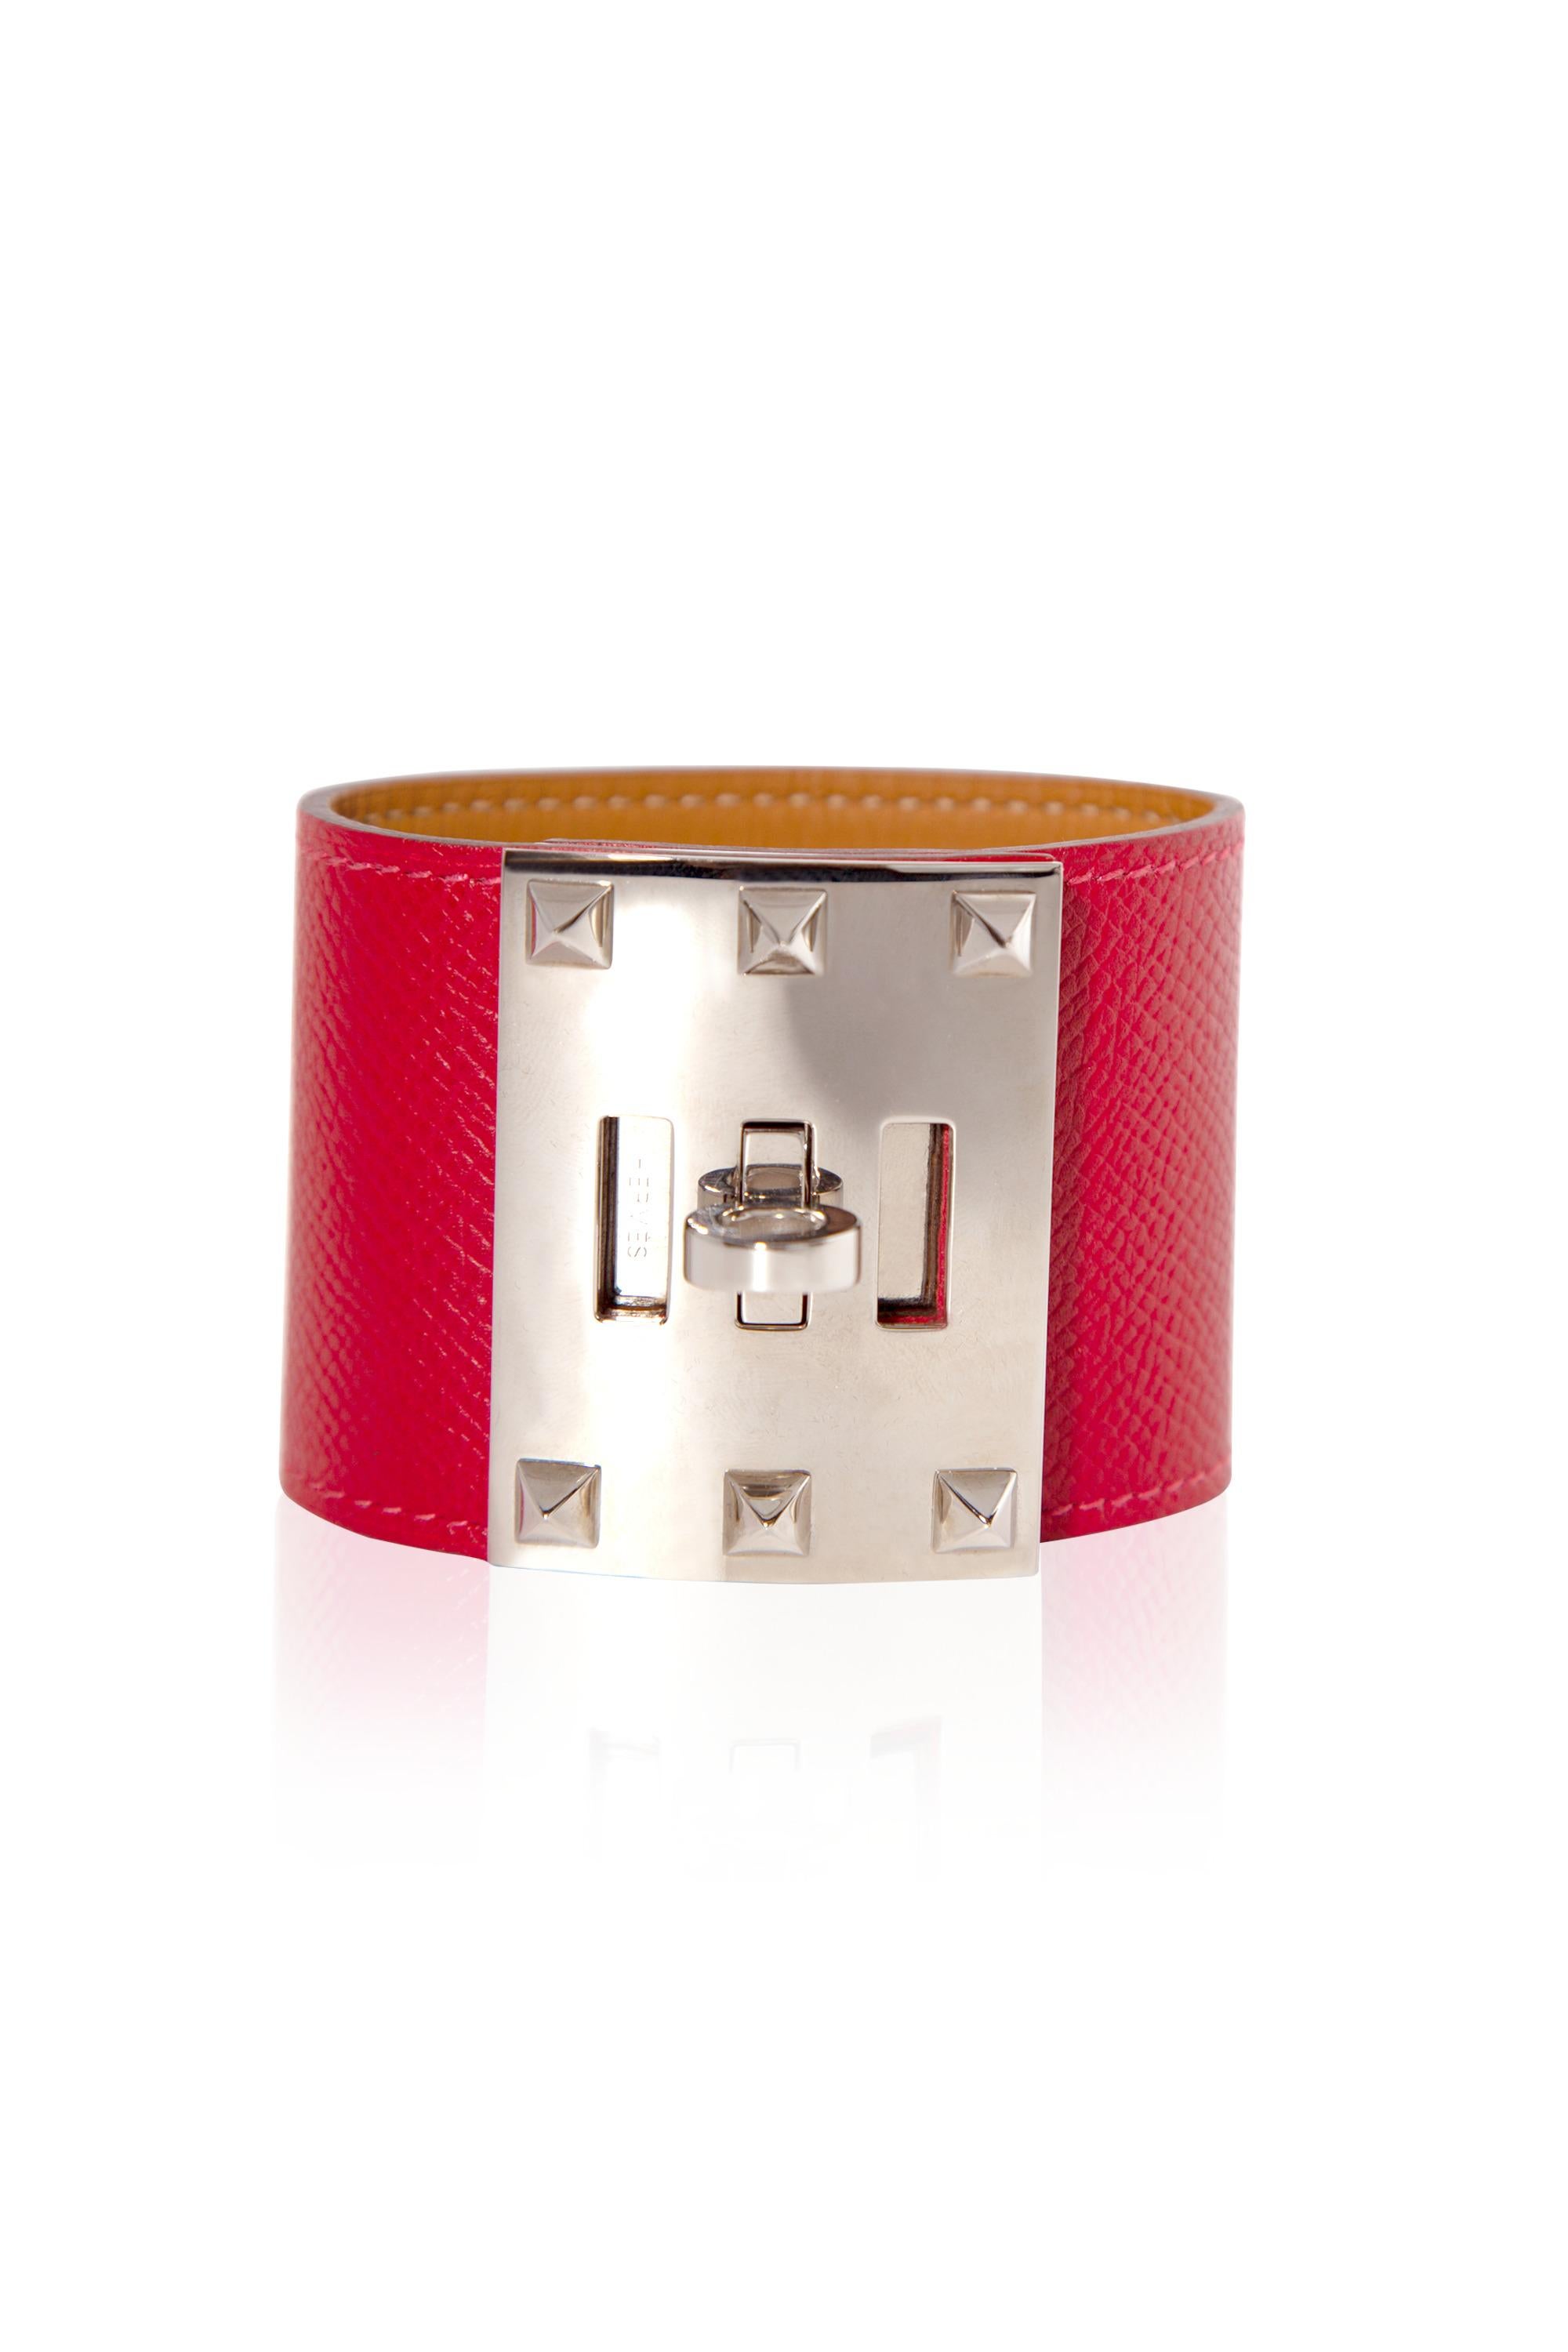 Hermès Kelly Dog Extreme Bracelet in Red Epsom PHW In Excellent Condition For Sale In London, GB